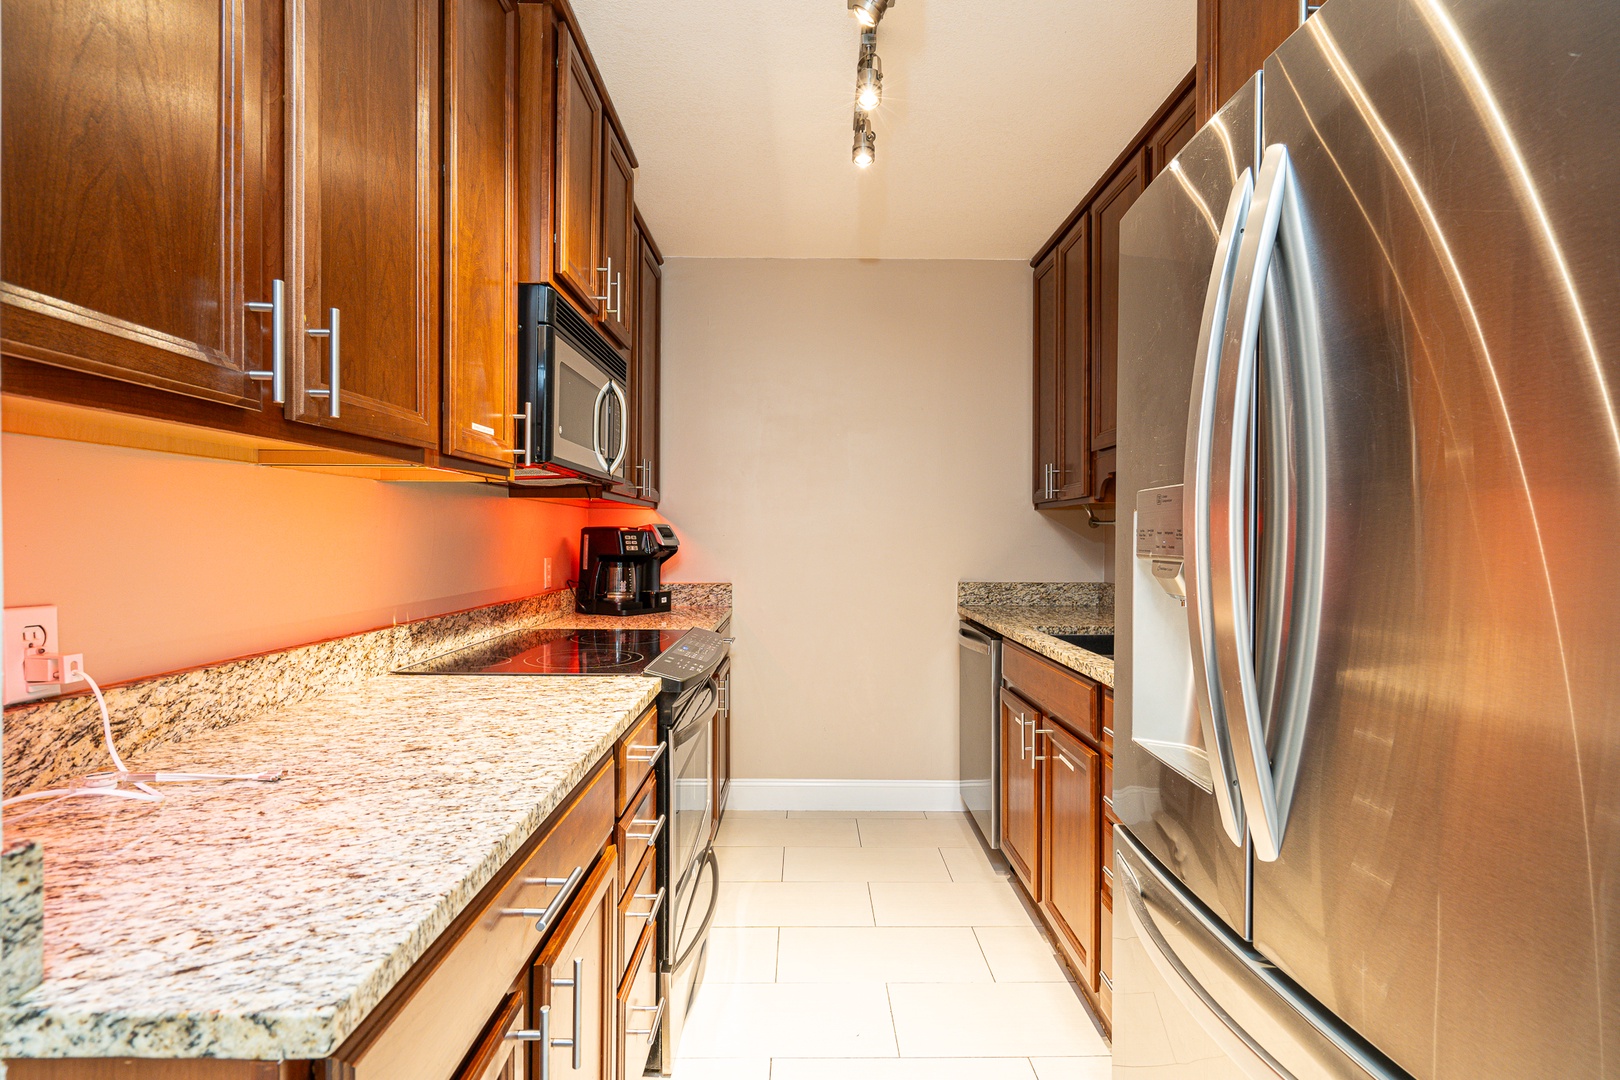 The inviting kitchen offers ample space & all the comforts of home